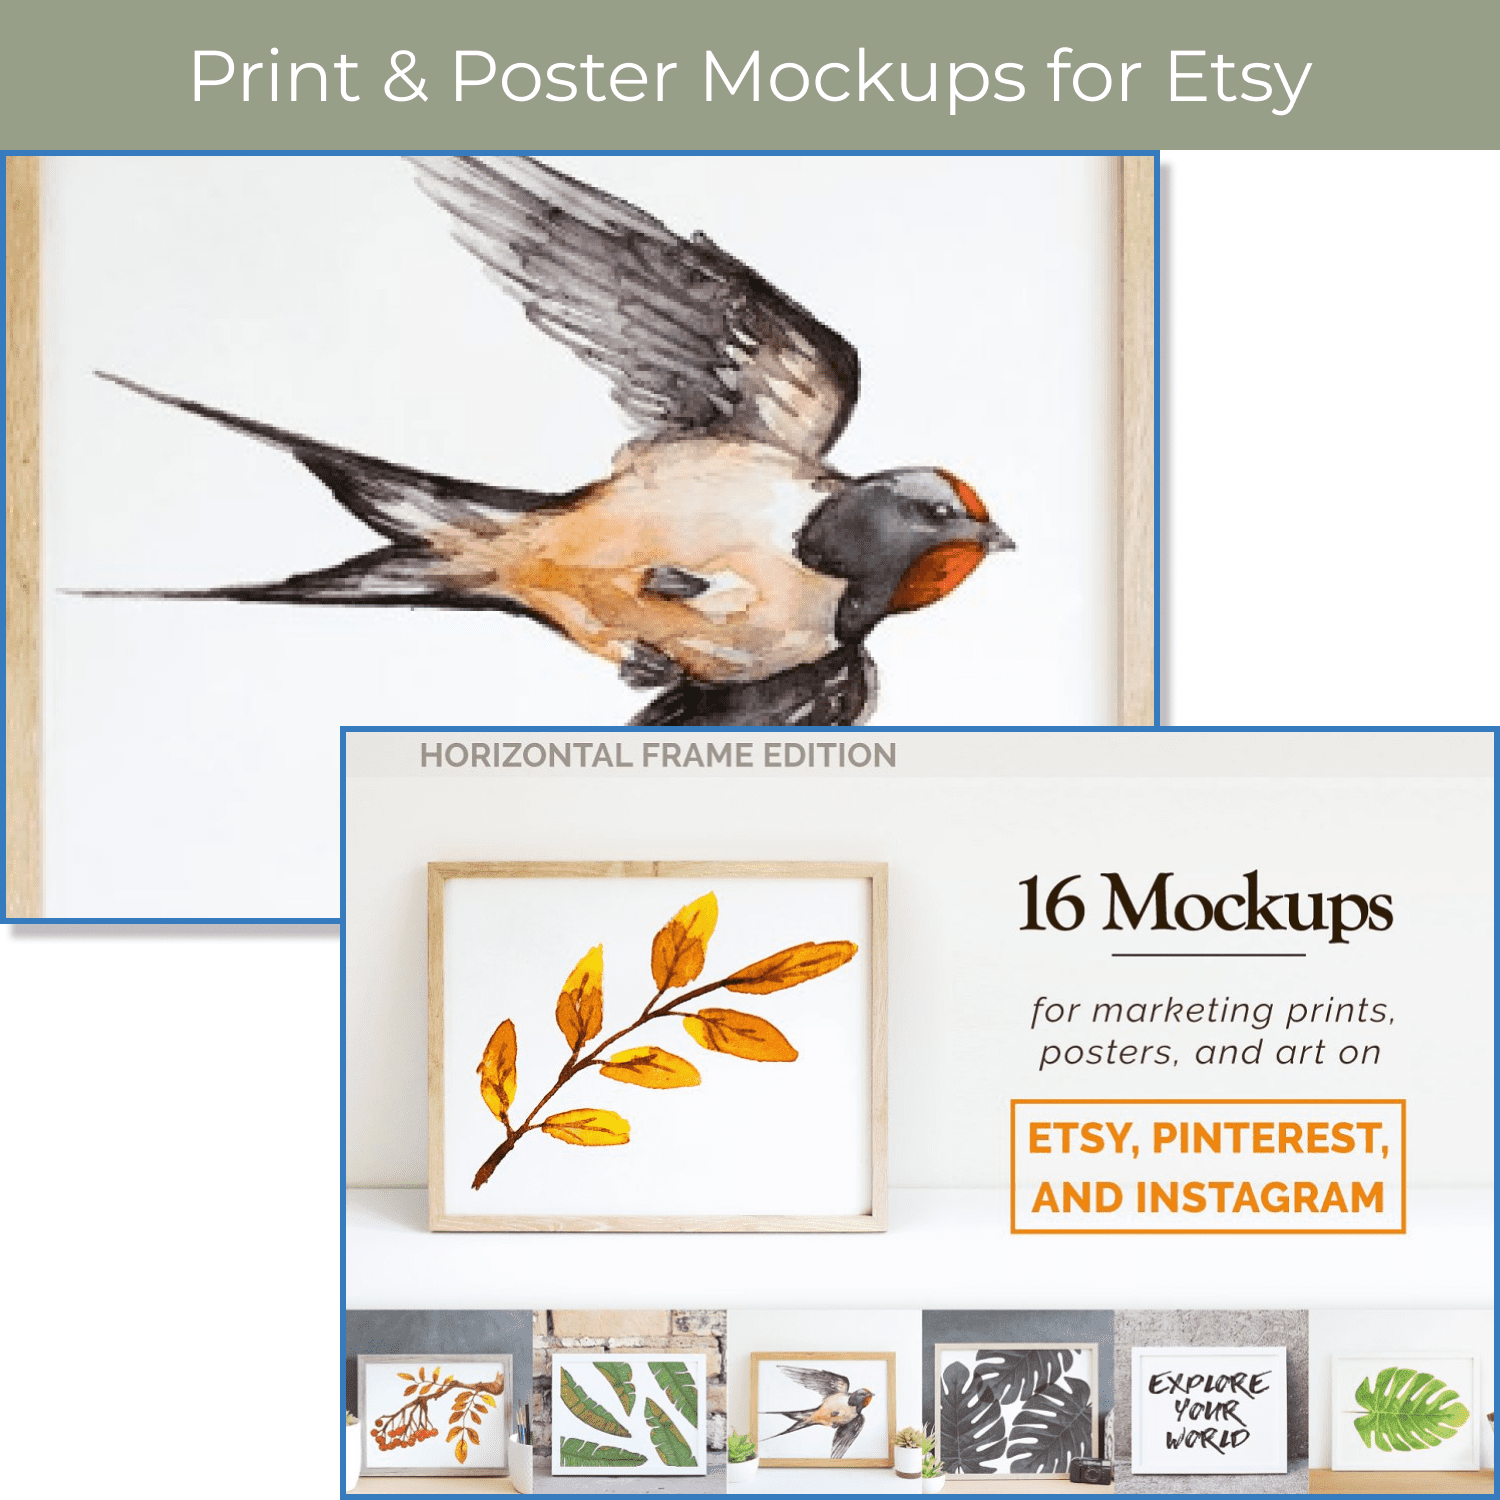 Print Poster Mockups for Etsy cover image.